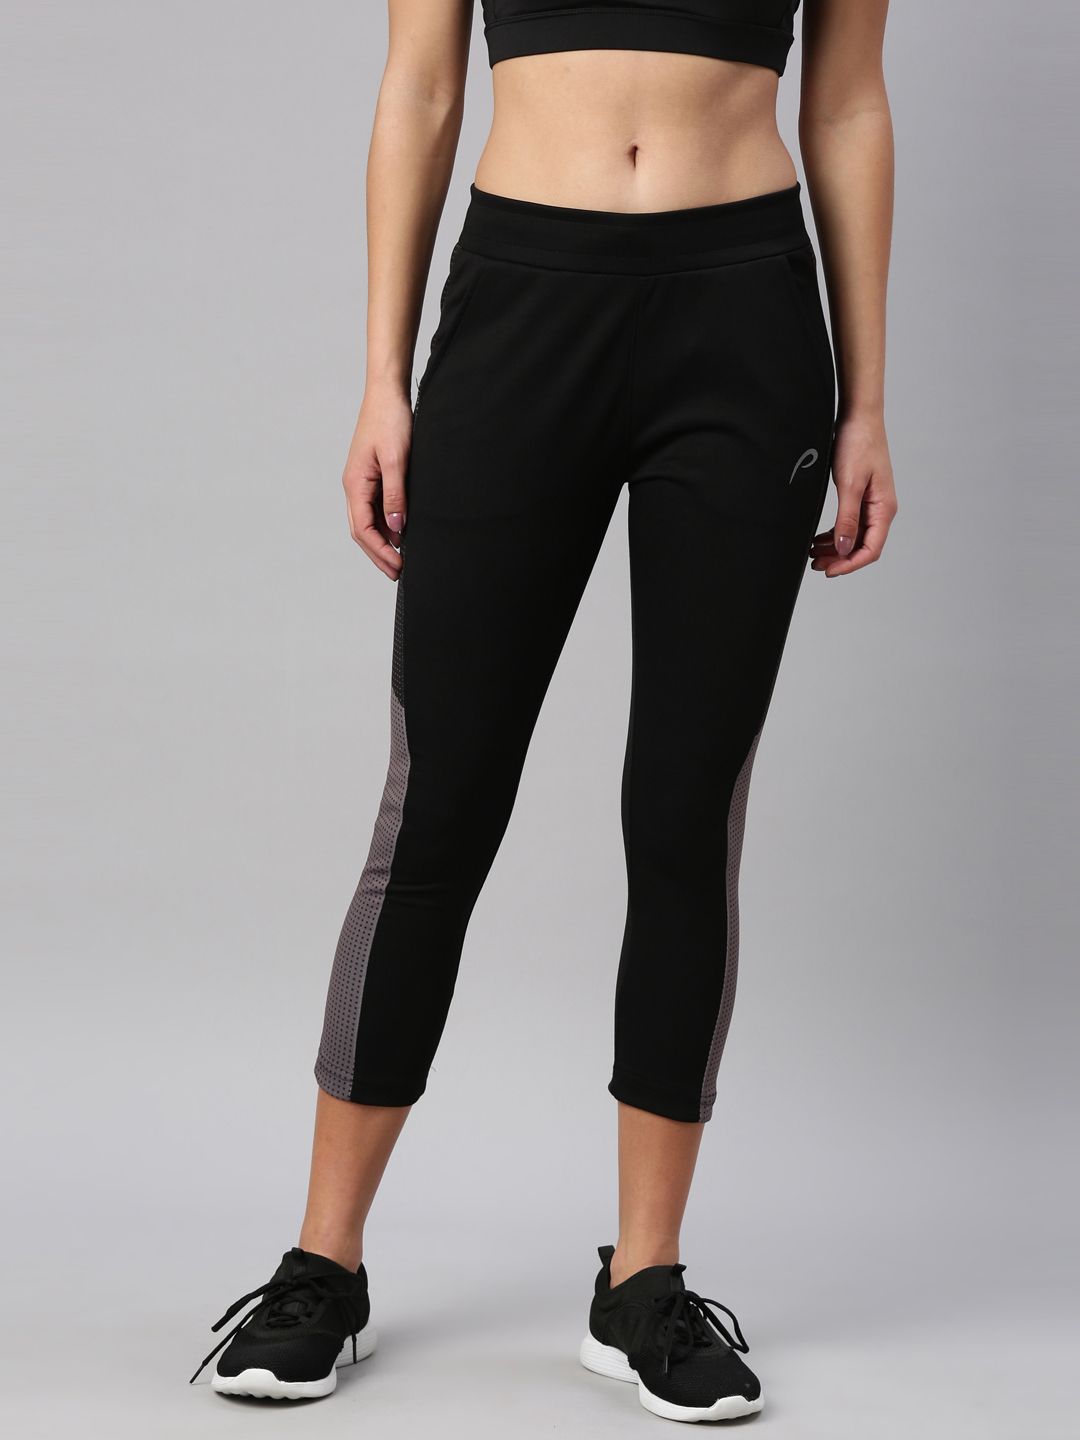 GymX Womens wear- Activewear for women starting at Rs.599.